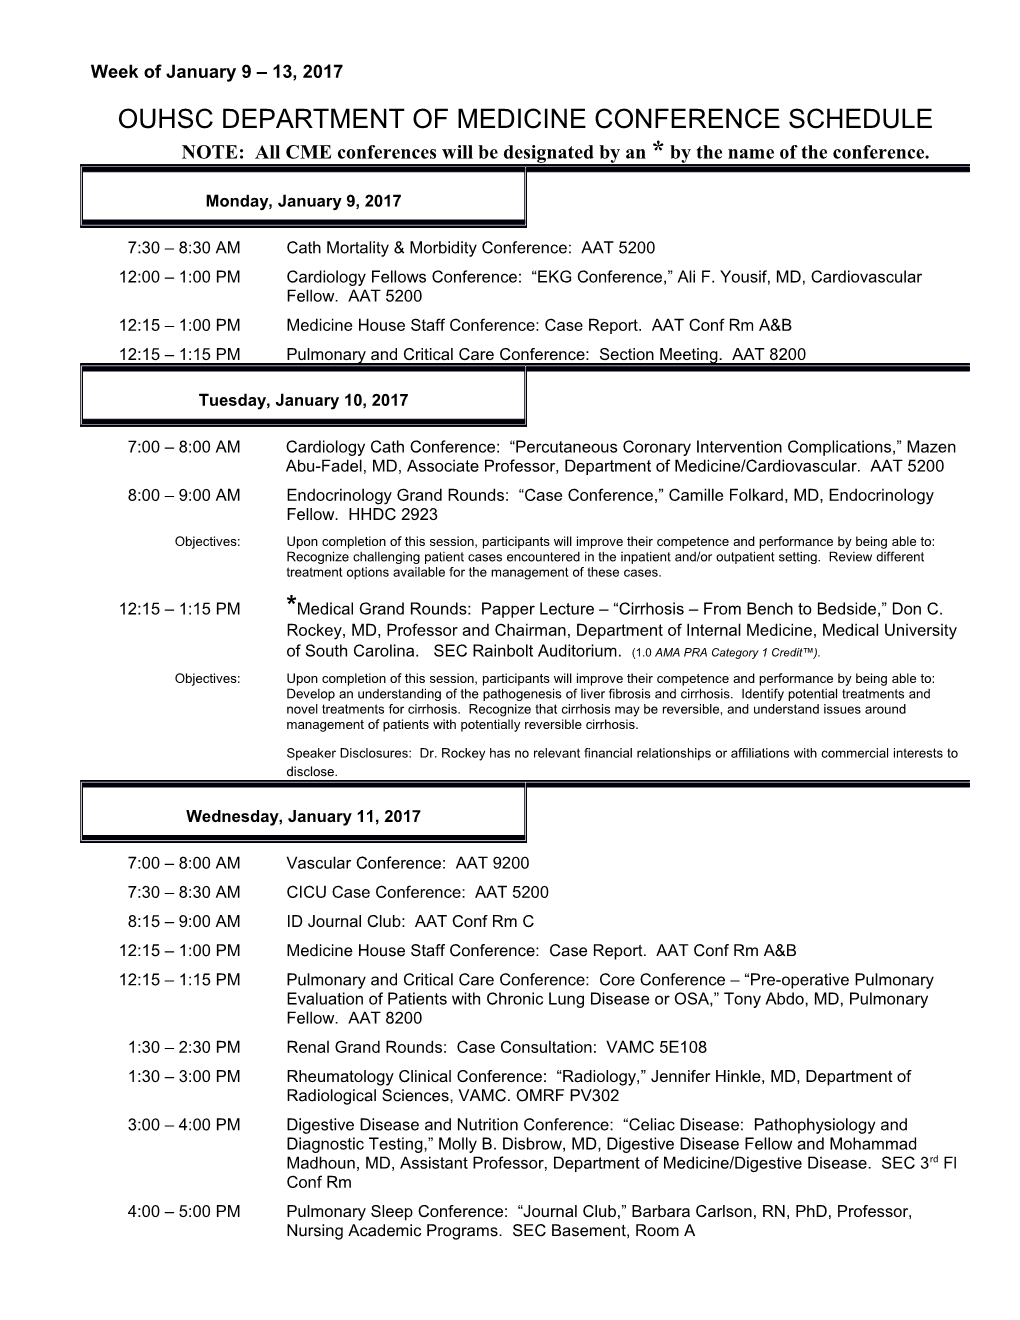 Ouhsc Department of Medicine Conference Schedule